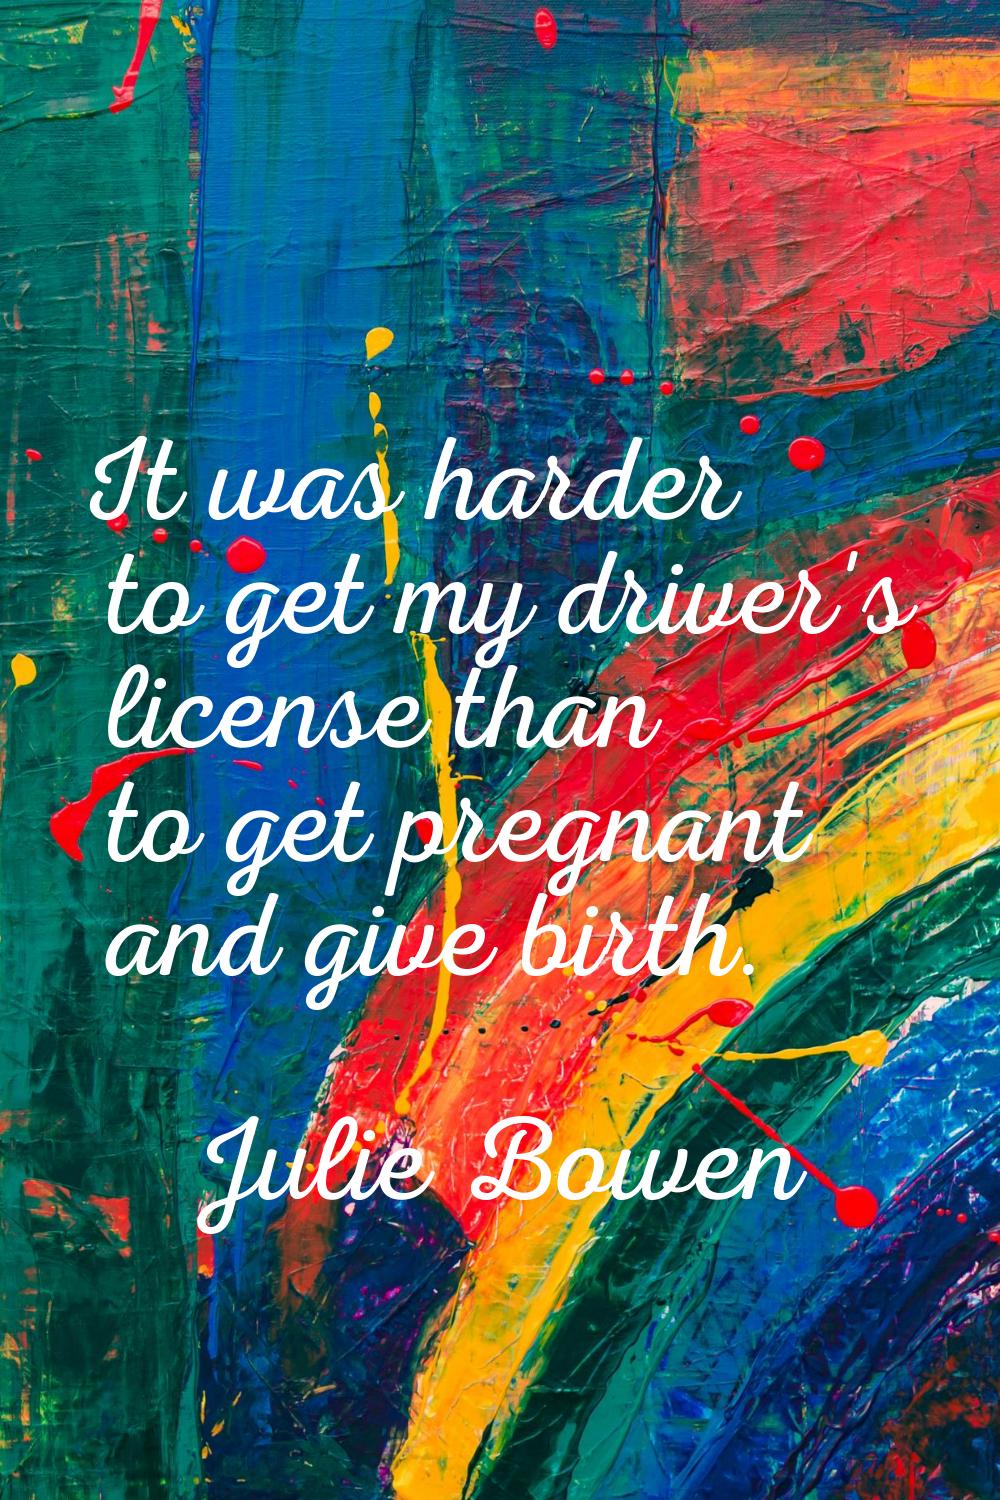 It was harder to get my driver's license than to get pregnant and give birth.